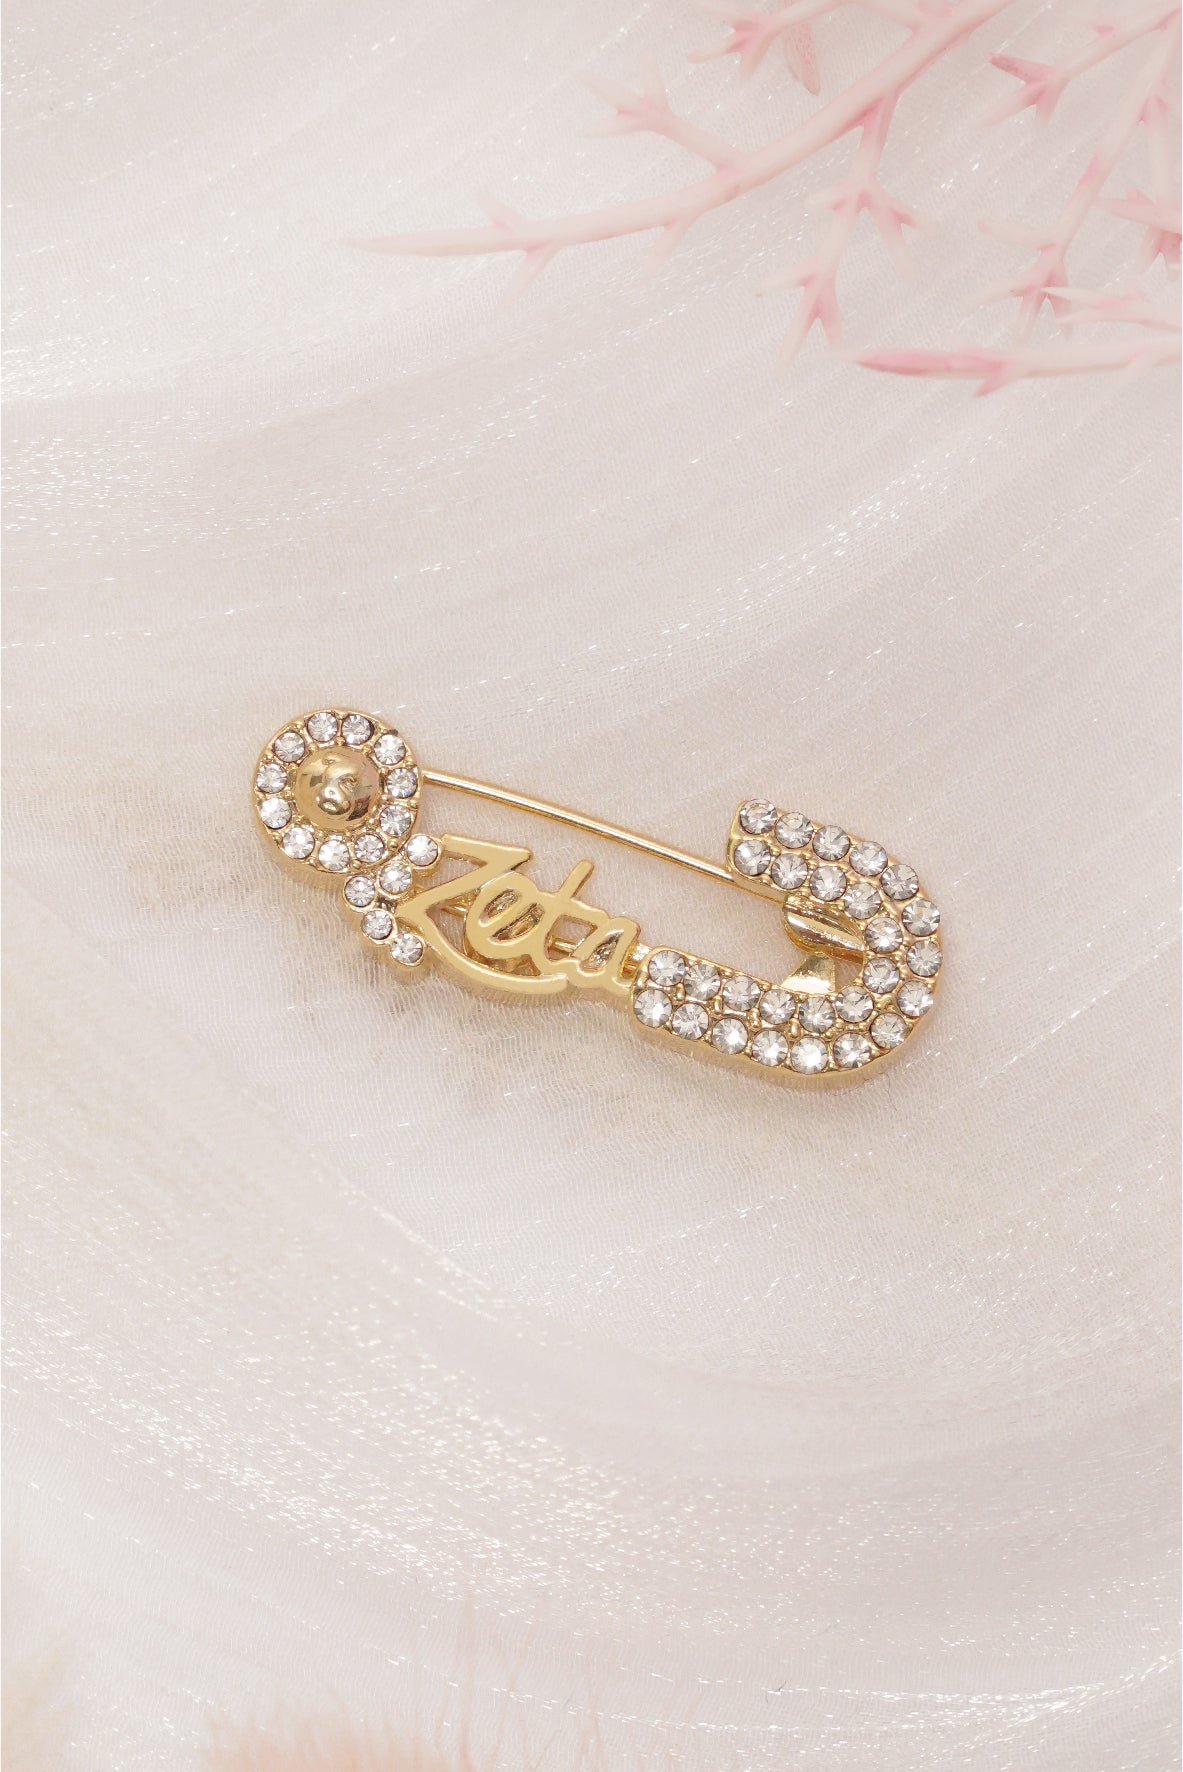 Safety Hijab Pin With Crystal - Gold